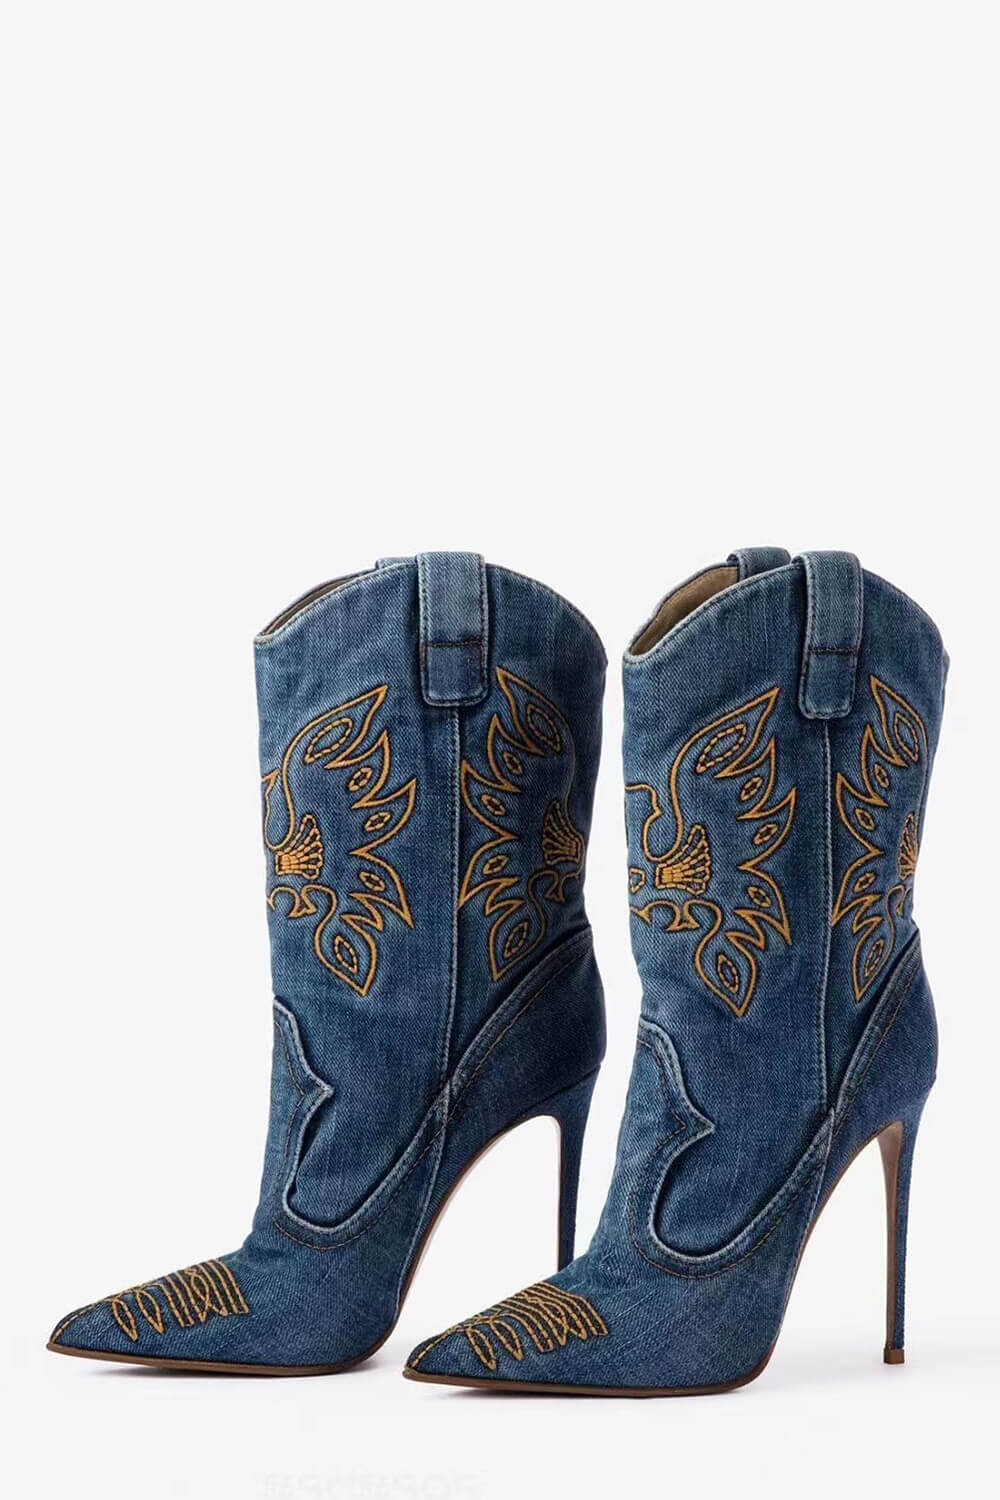 Blue Denim Western-Inspired Ankle Stiletto Heeled Boots With Embroidery